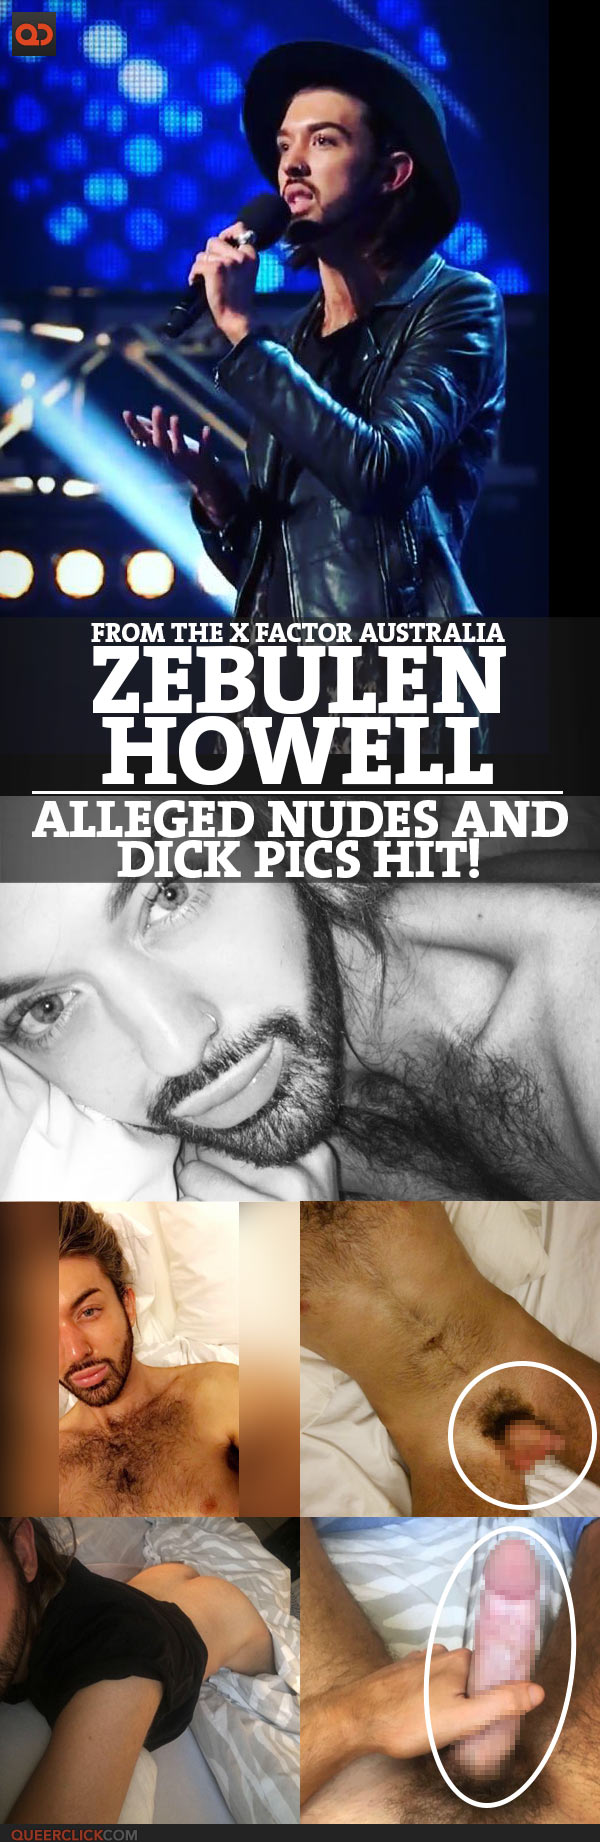 Zebulen Howell, From The X Factor Australia, Alleged Nudes And Dick Pics Hit!